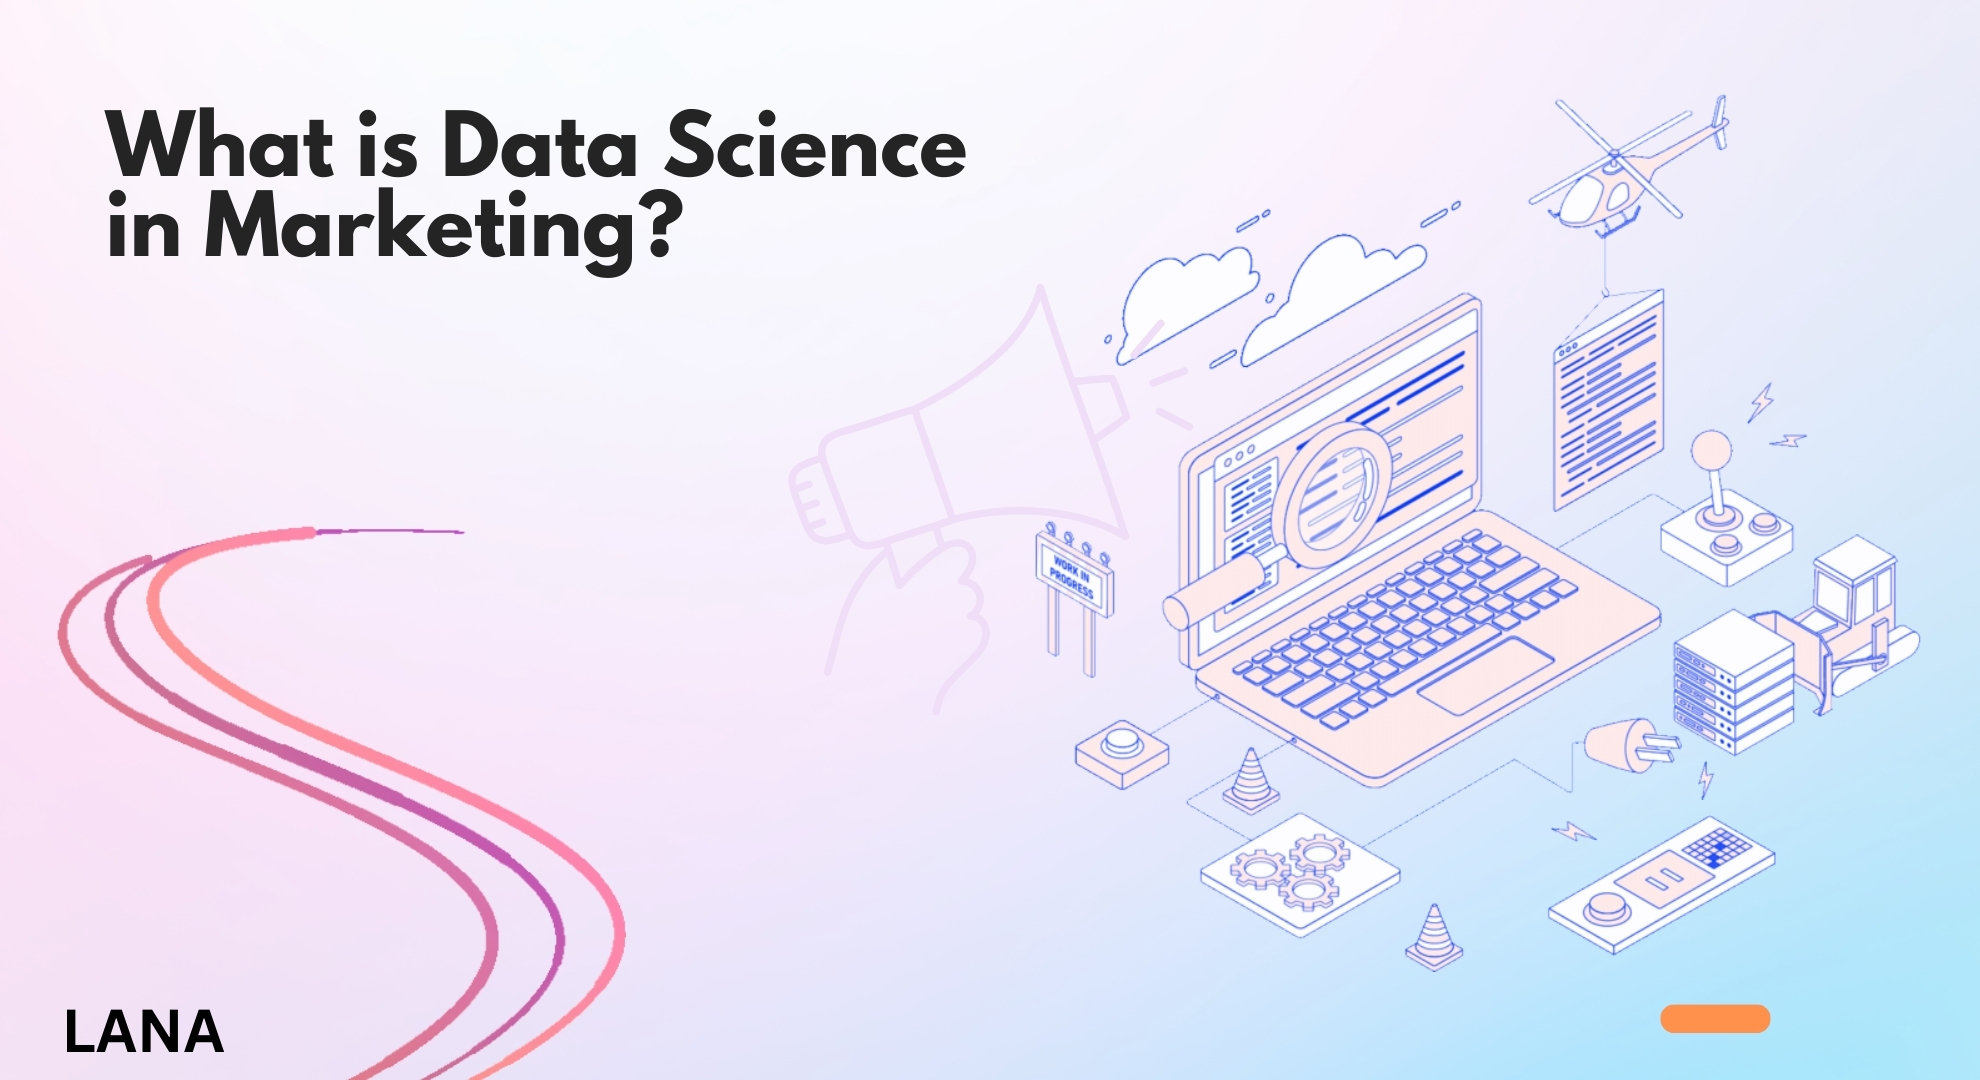 What is Data Science in Marketing